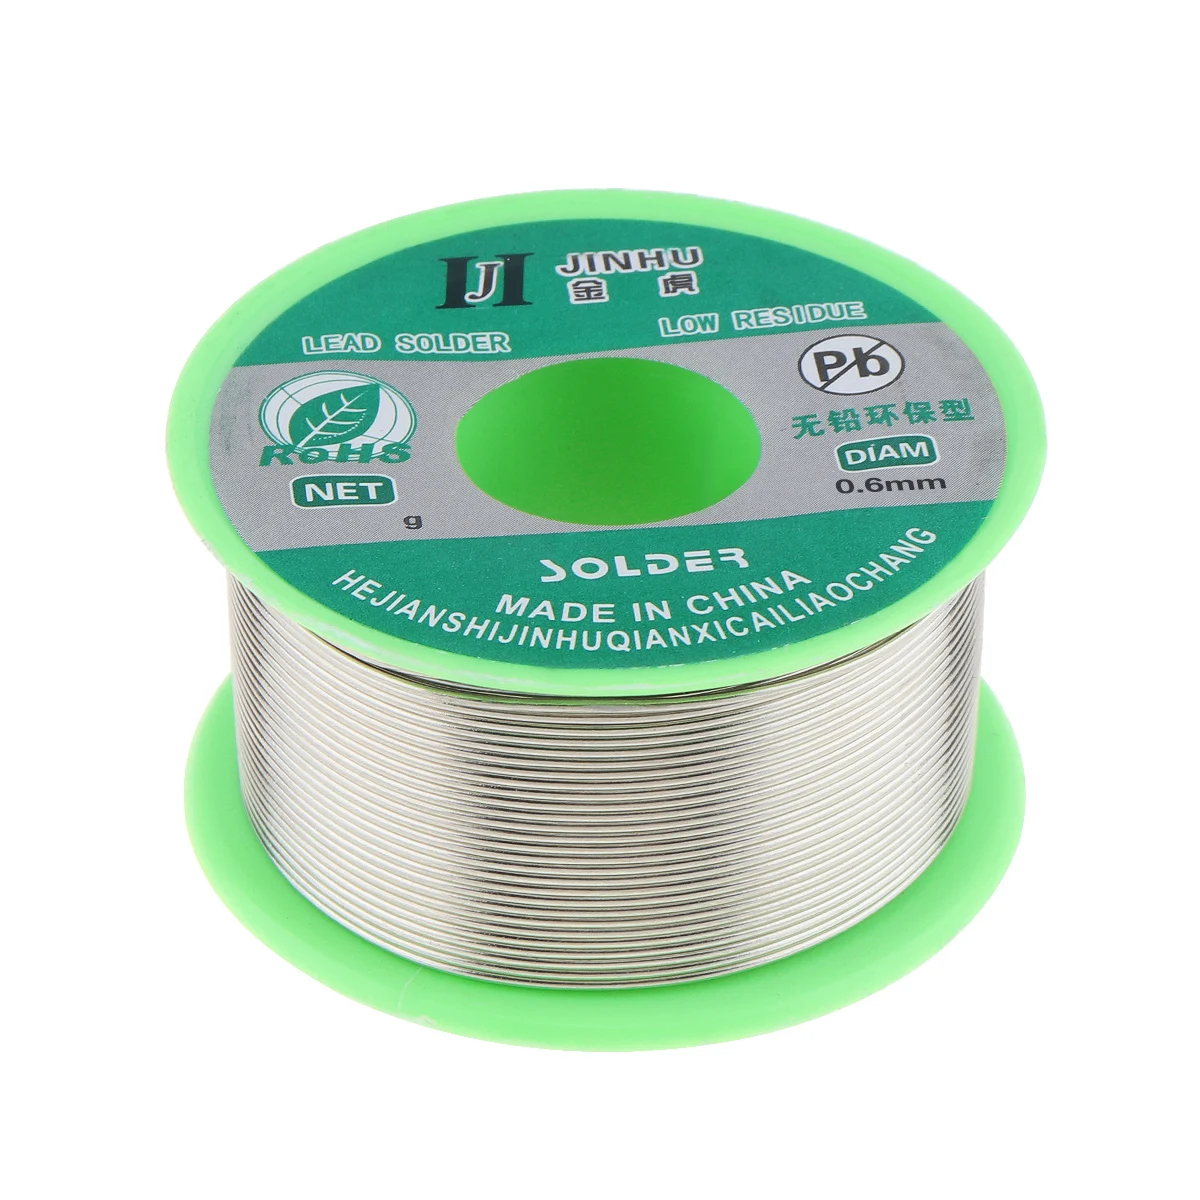 Sn97.3% Rosin2% Cu0.7% with Rosin Core for ... Fixget 1mm Lead Free Solder Wire 